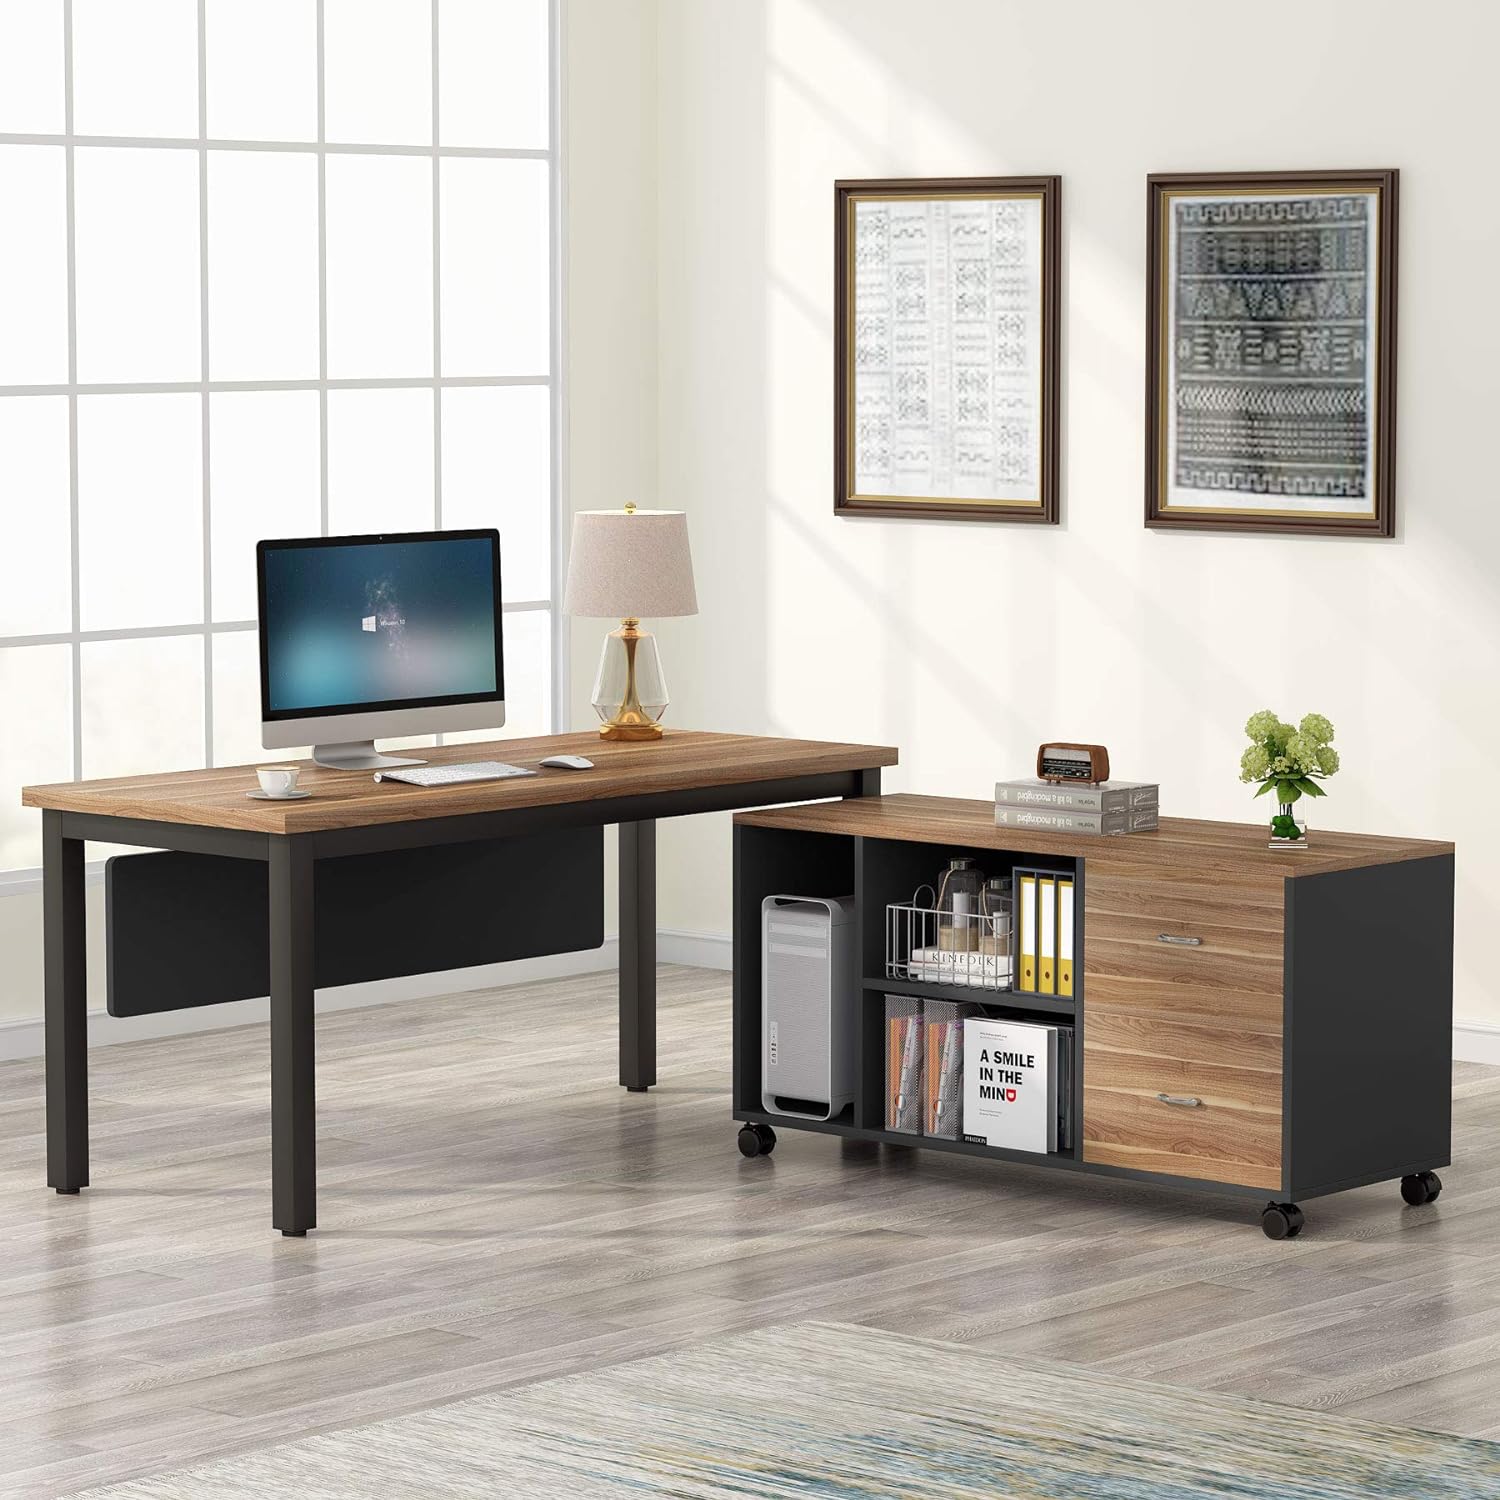 Large Desk with Cabinets